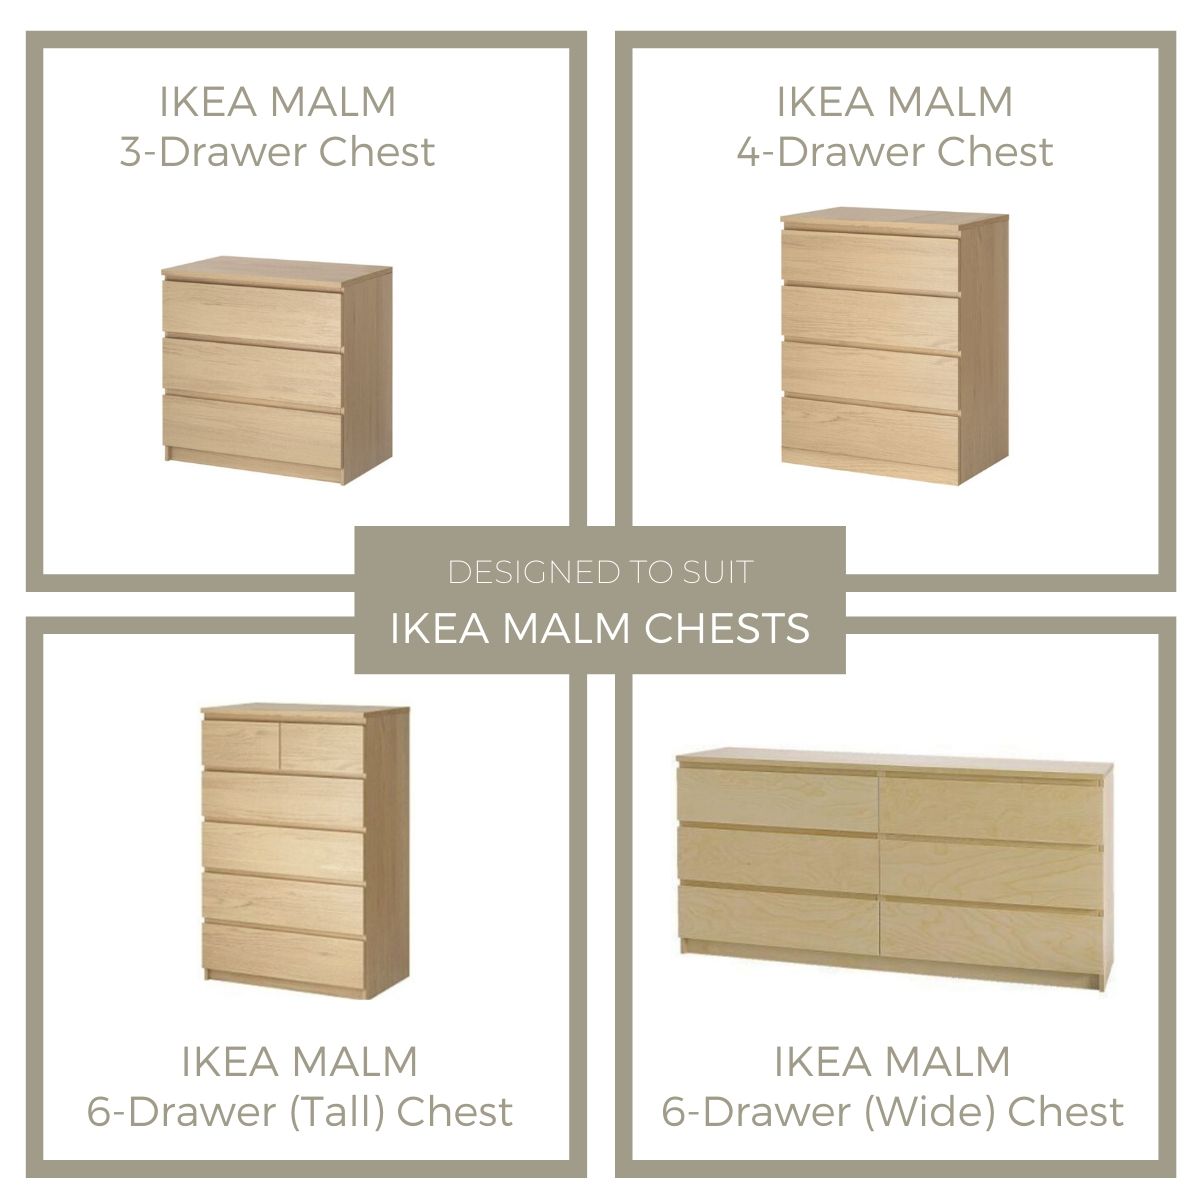 Styl-Panel Kit: #1134 to suit IKEA Malm 3 or 4 or 6-drawer chest - Lux Hax